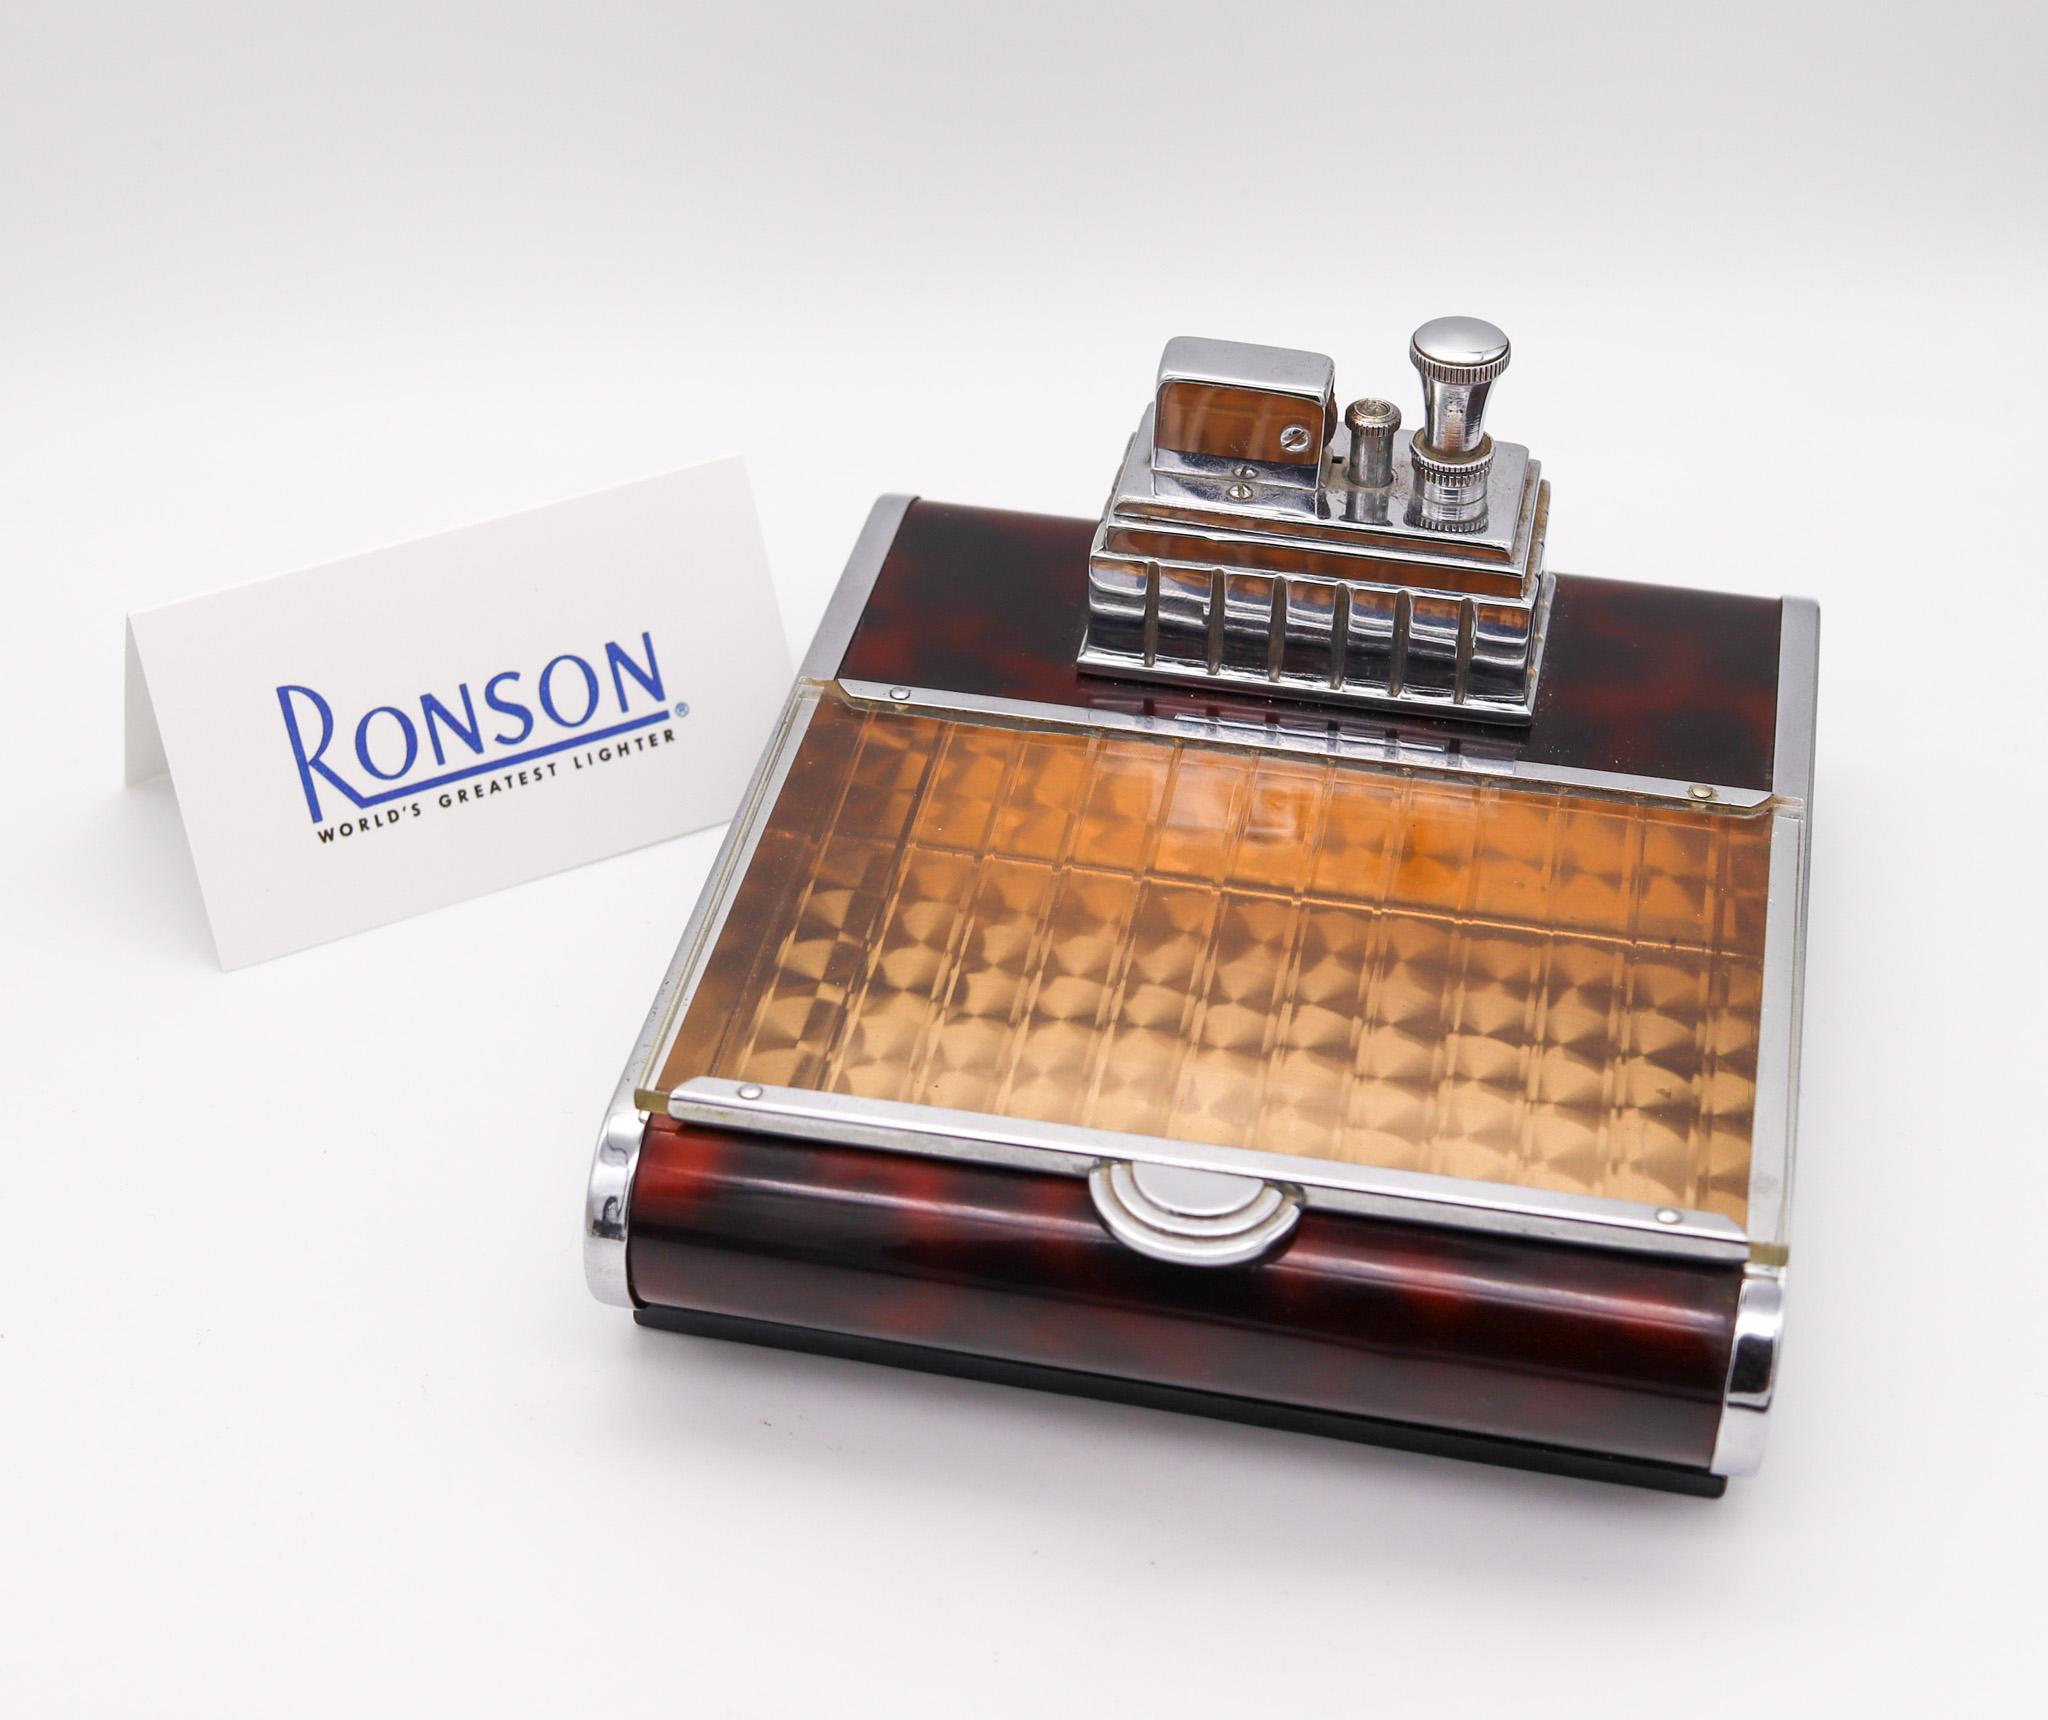 Art deco dispenser box with lighter designed by Ronson.

An exceptional and beautiful desk box, created in New Jersey United States by The Ronson Metal Works Co. during the art deco period, back in the 1939. This is a very rare box made in